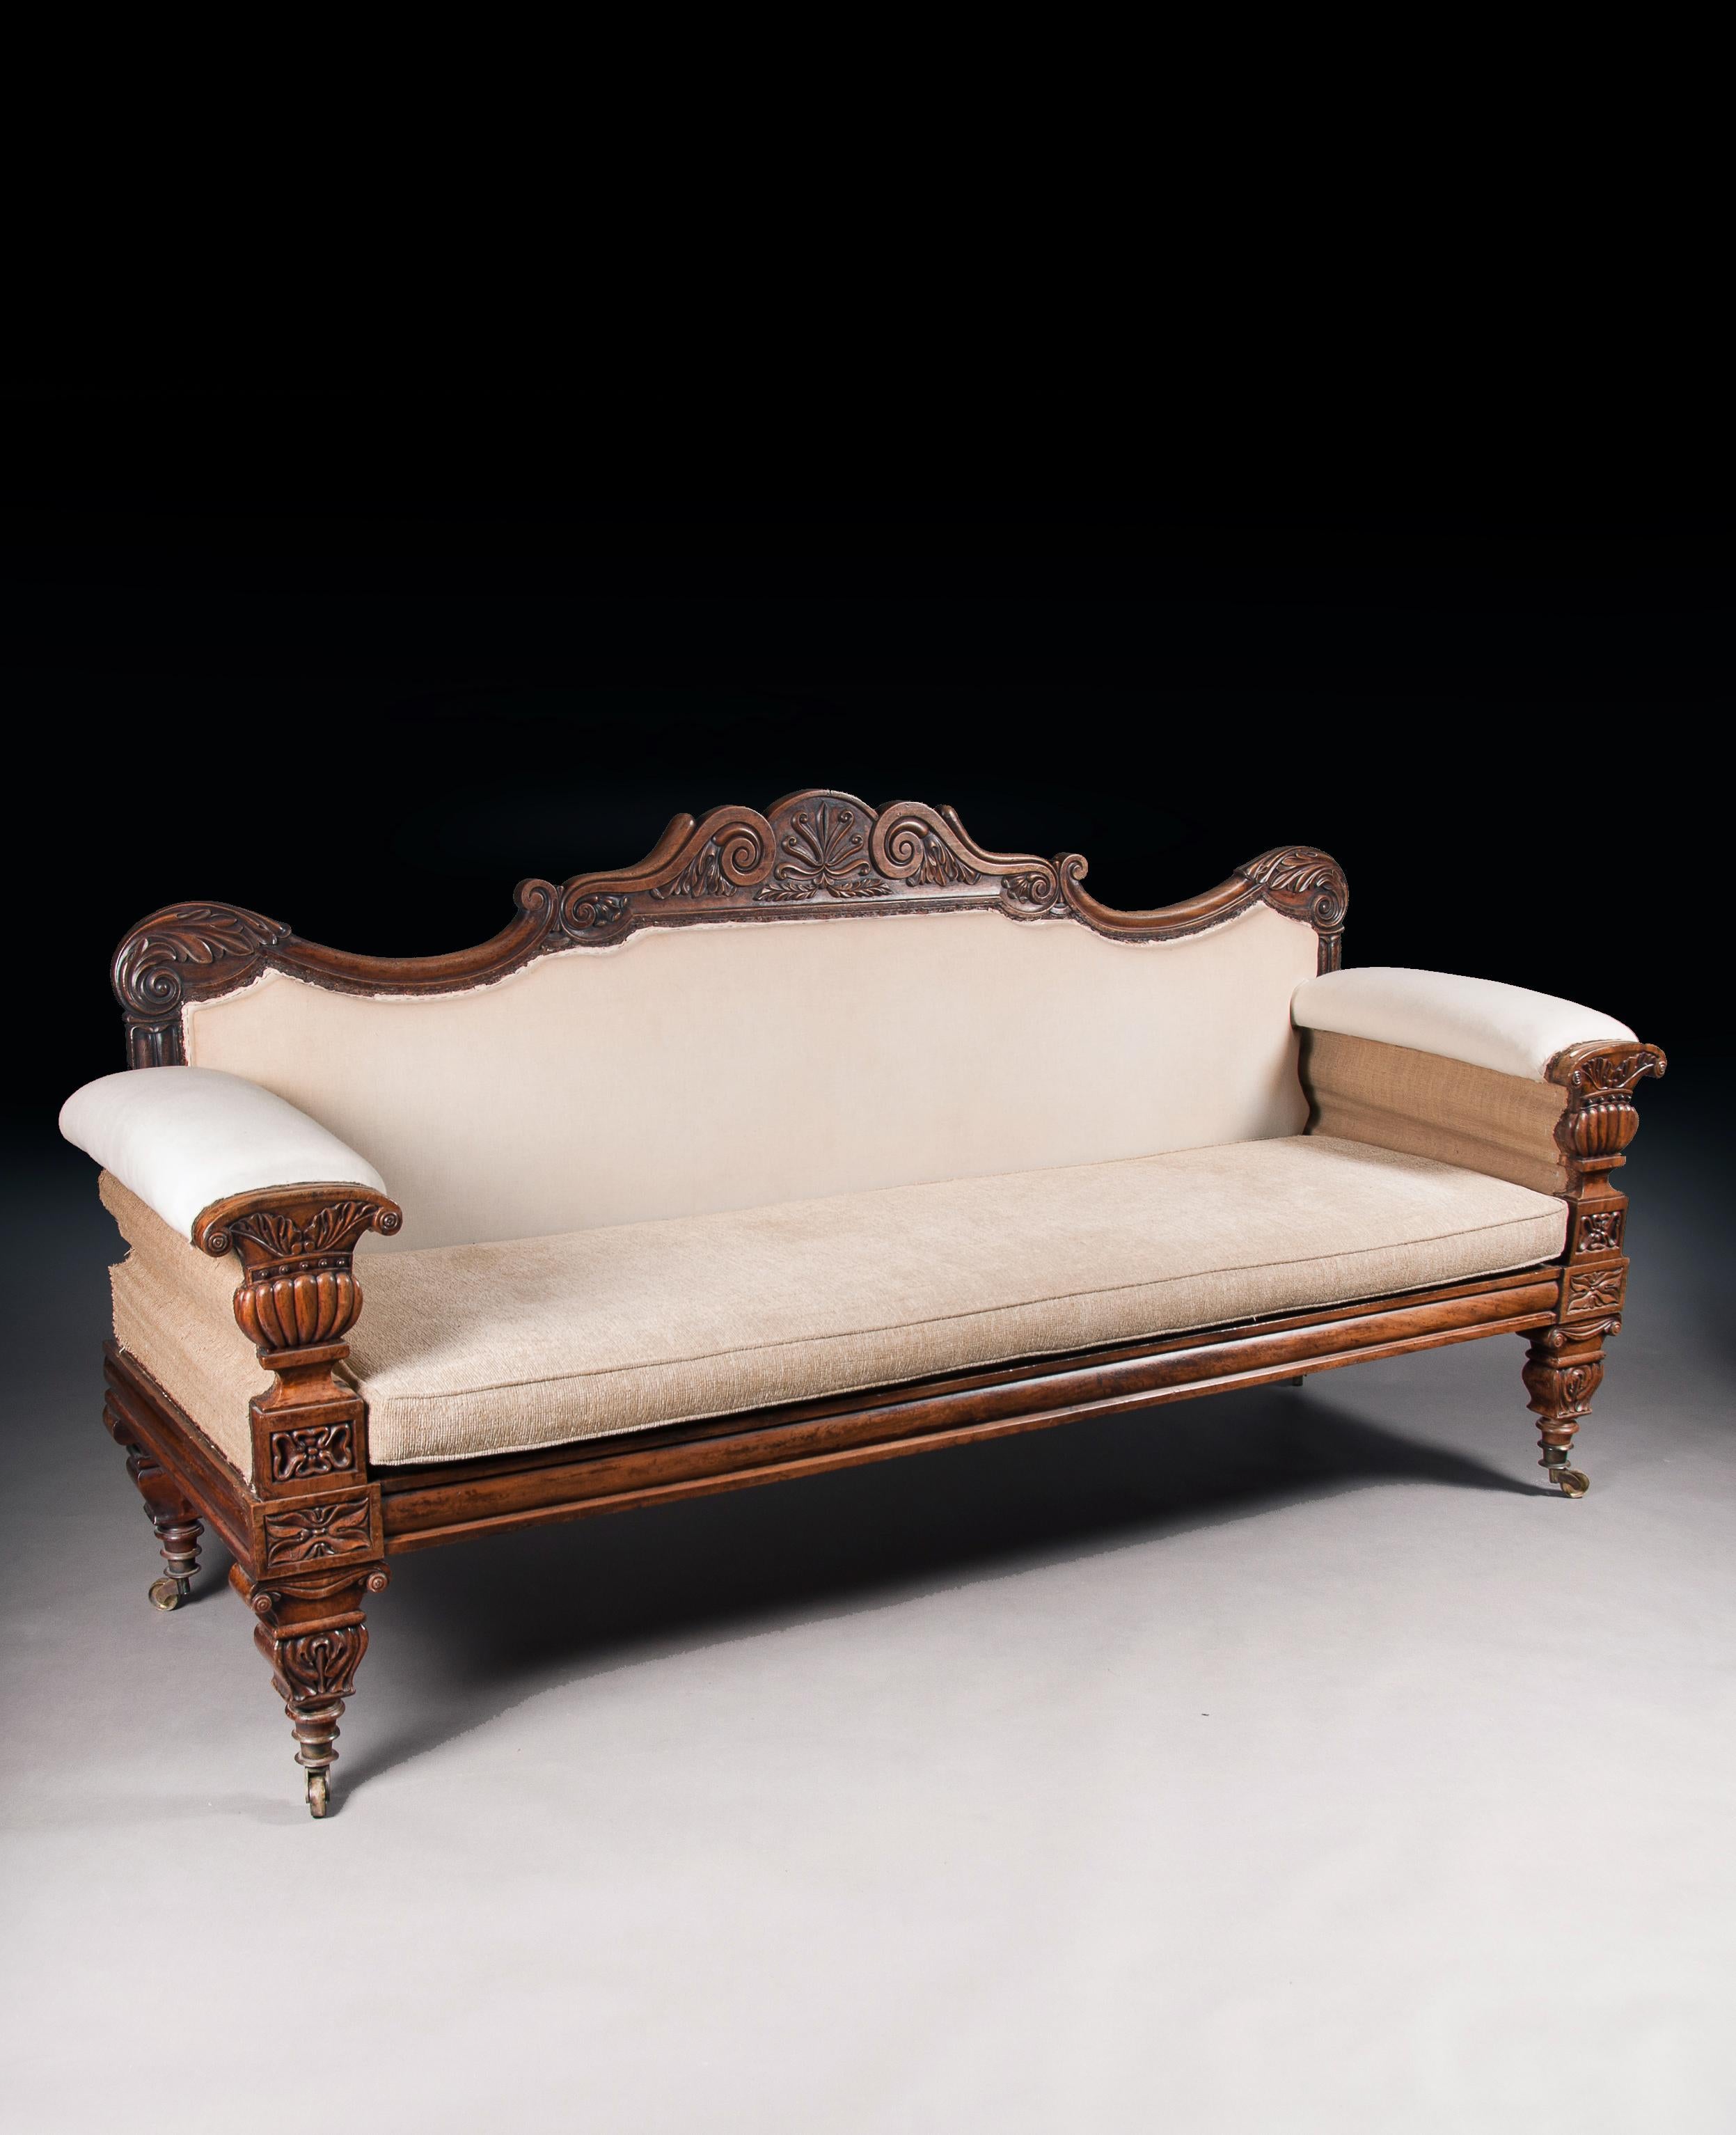 A very fine English Regency carved mahogany sofa after a design by John Taylor incorporating Greek and Roman elements.

English, circa 1825.

Having acanthus leaf wrapped carved scroll ends, the top rail features a shaped foliate double scroll